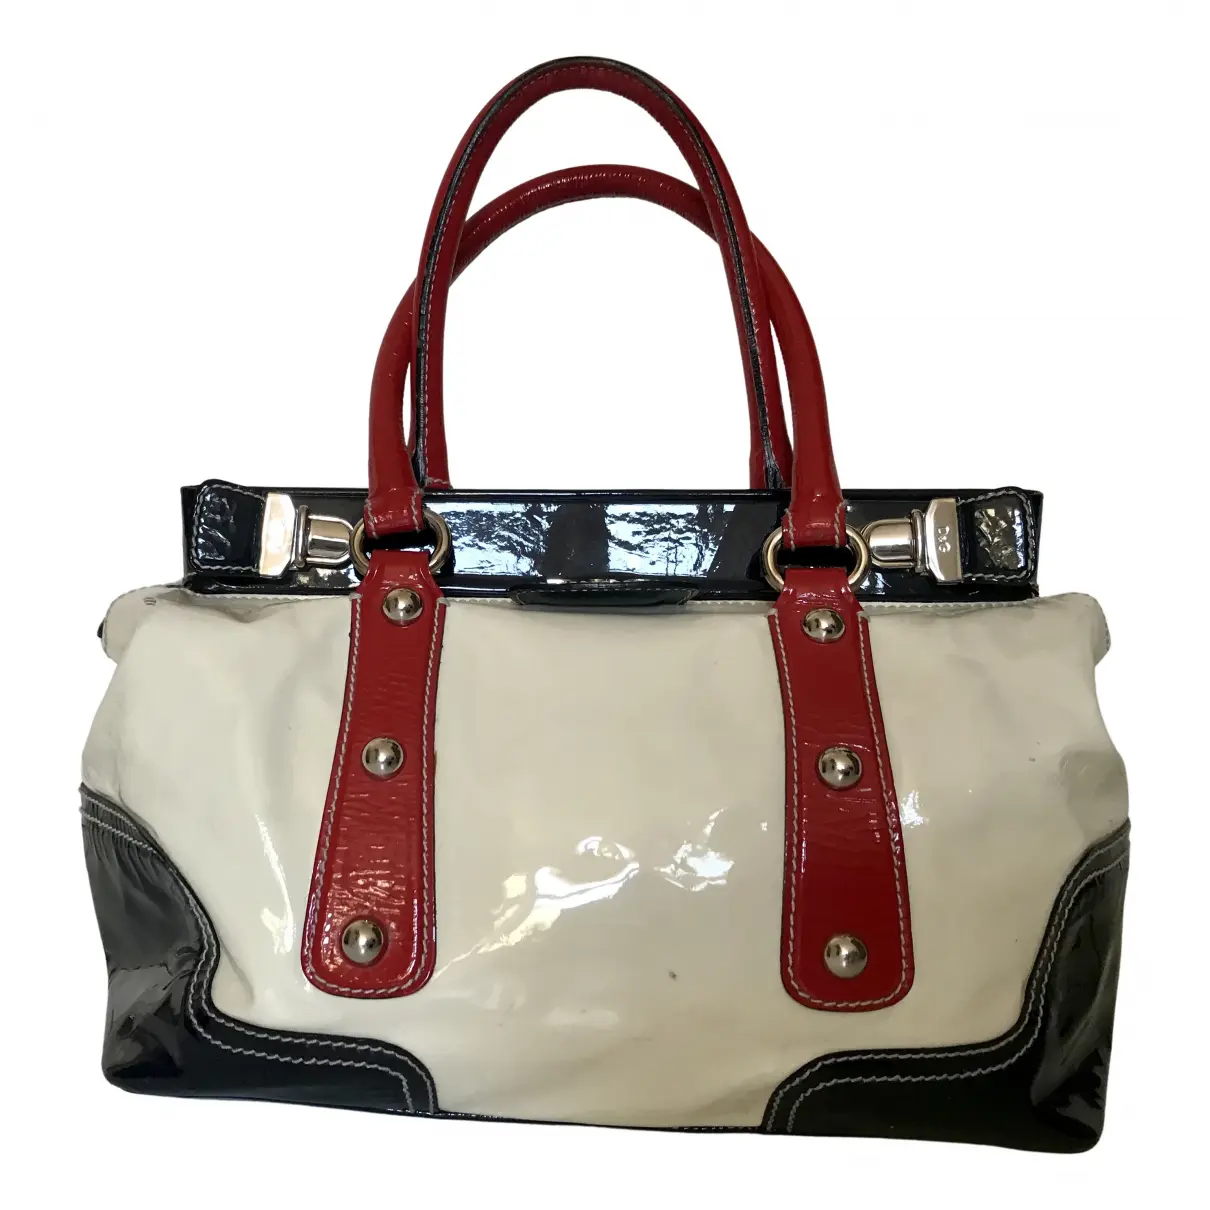 Patent leather tote D&G